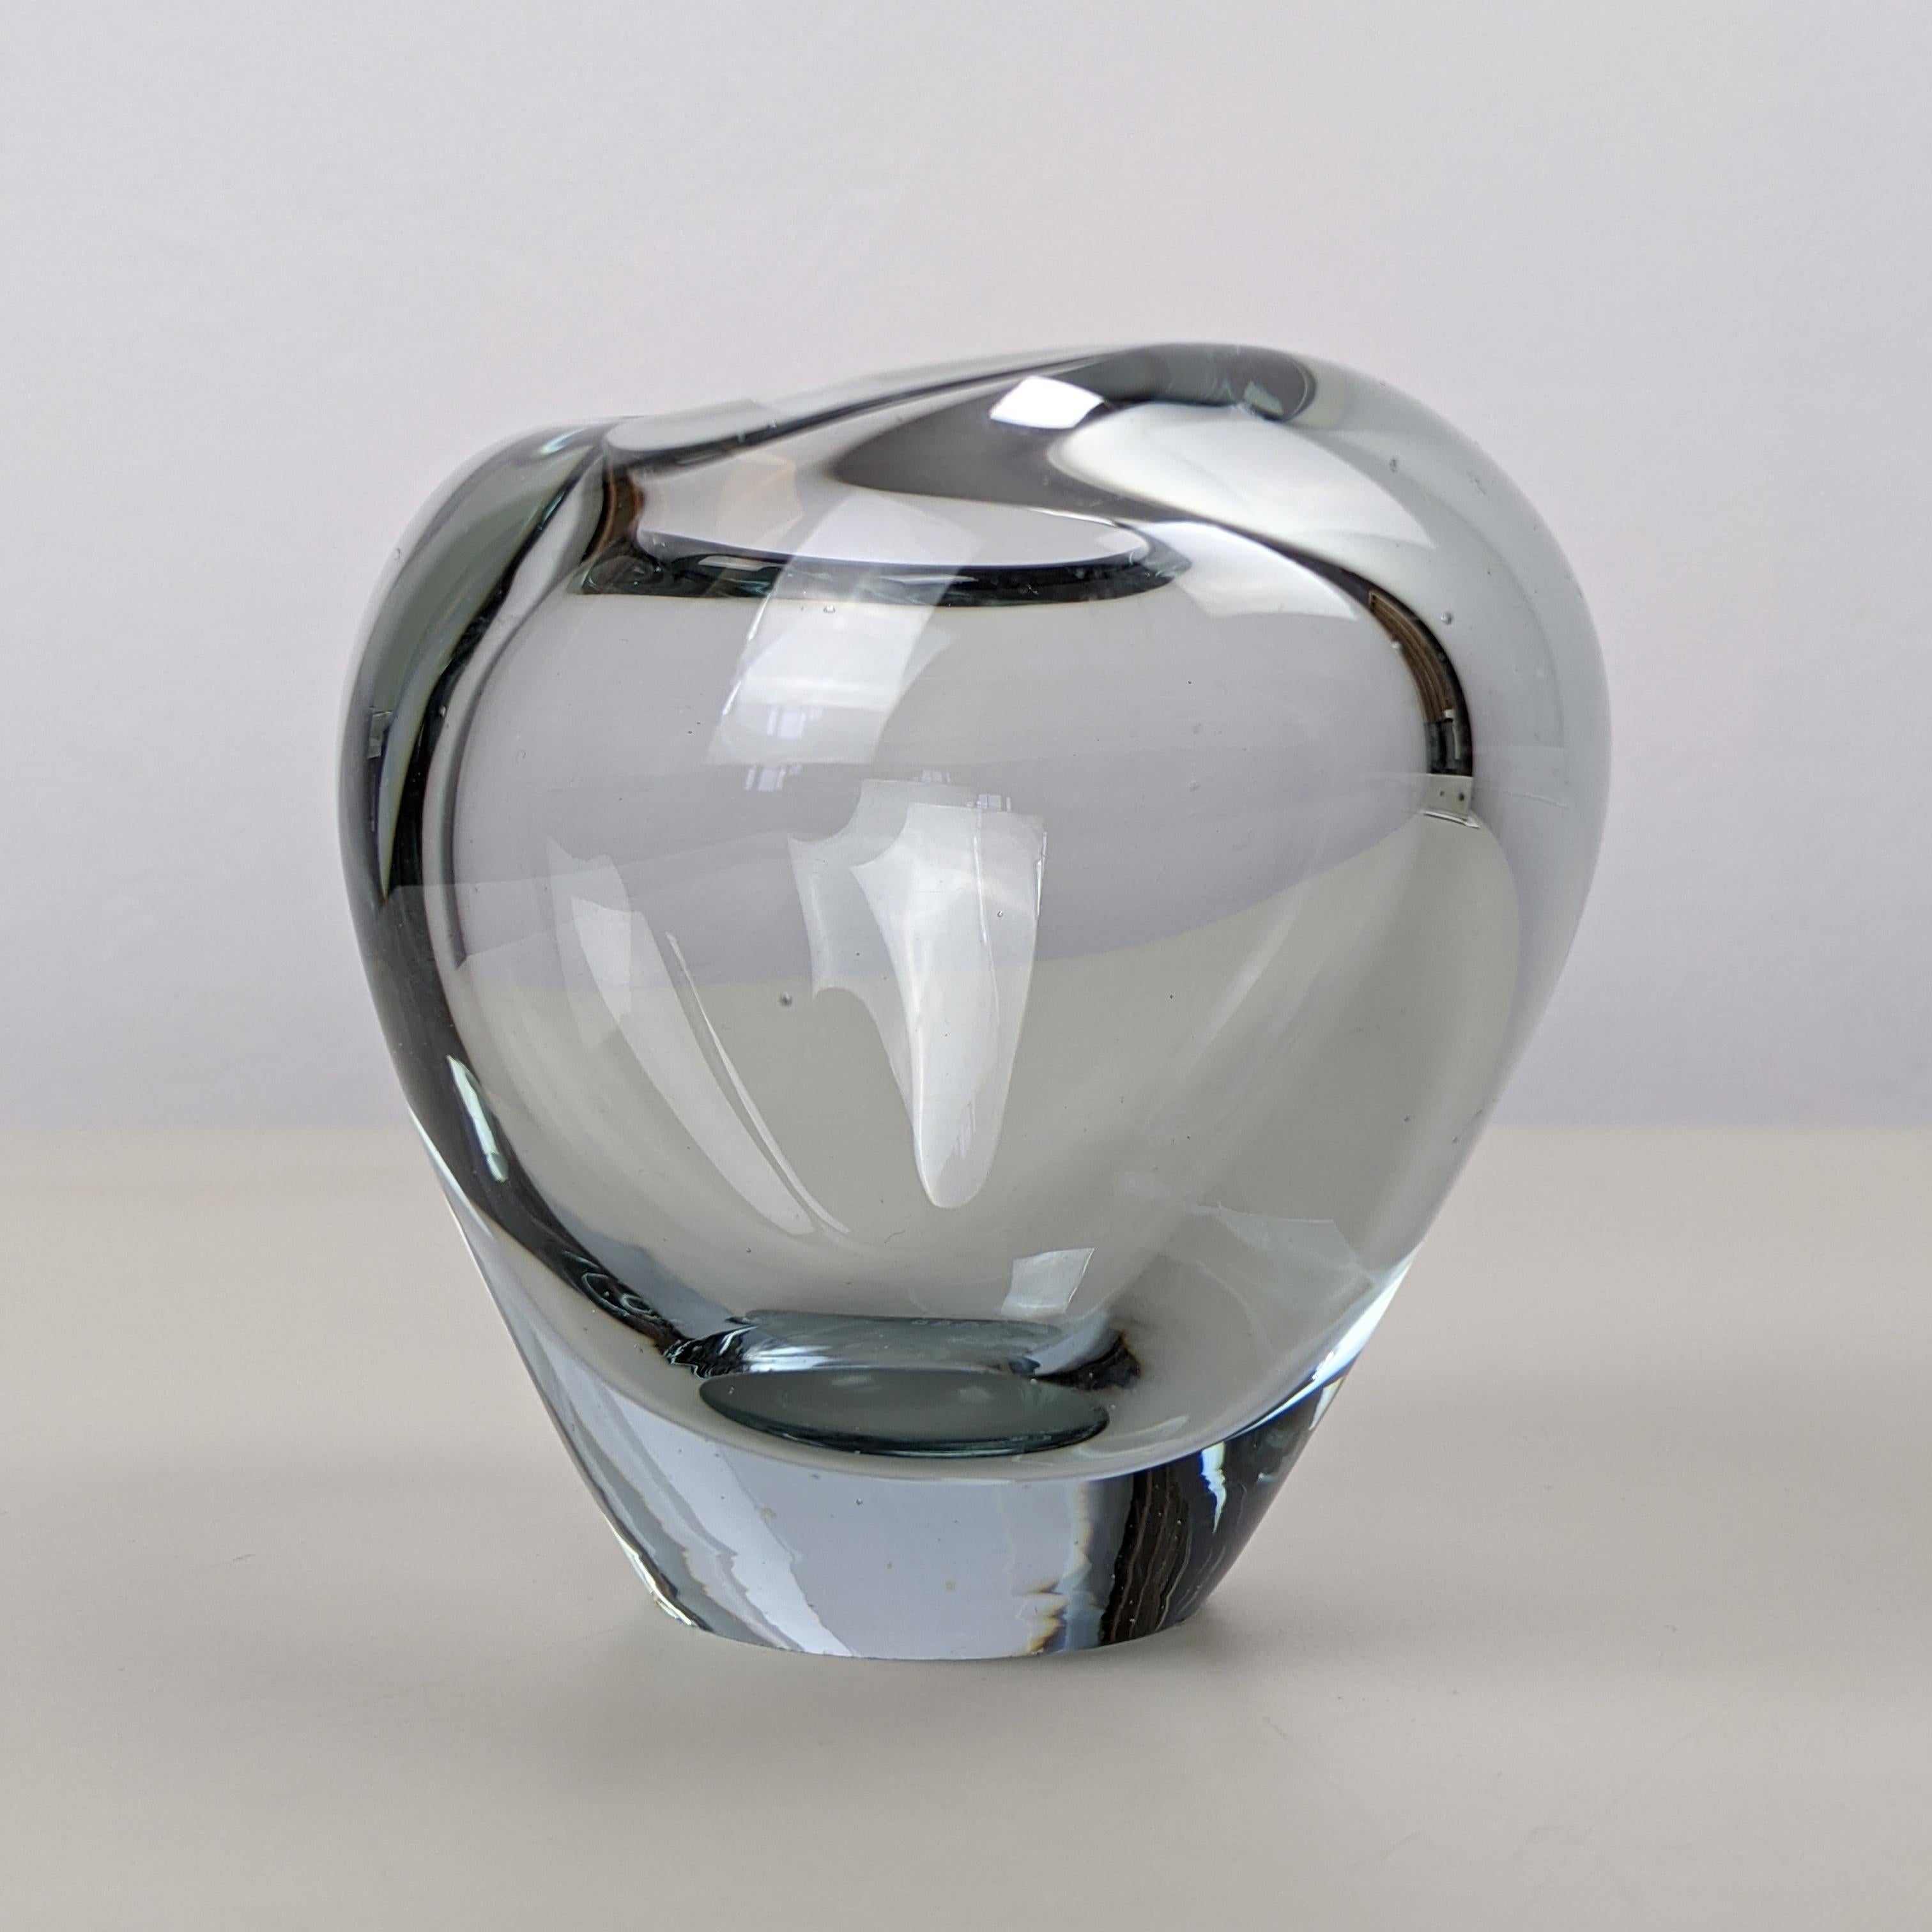 Mid-Century Modern ‘Menuet’ Small Heart-Shaped Vase by Per Lütken for Holmegaard, C. 1960 For Sale